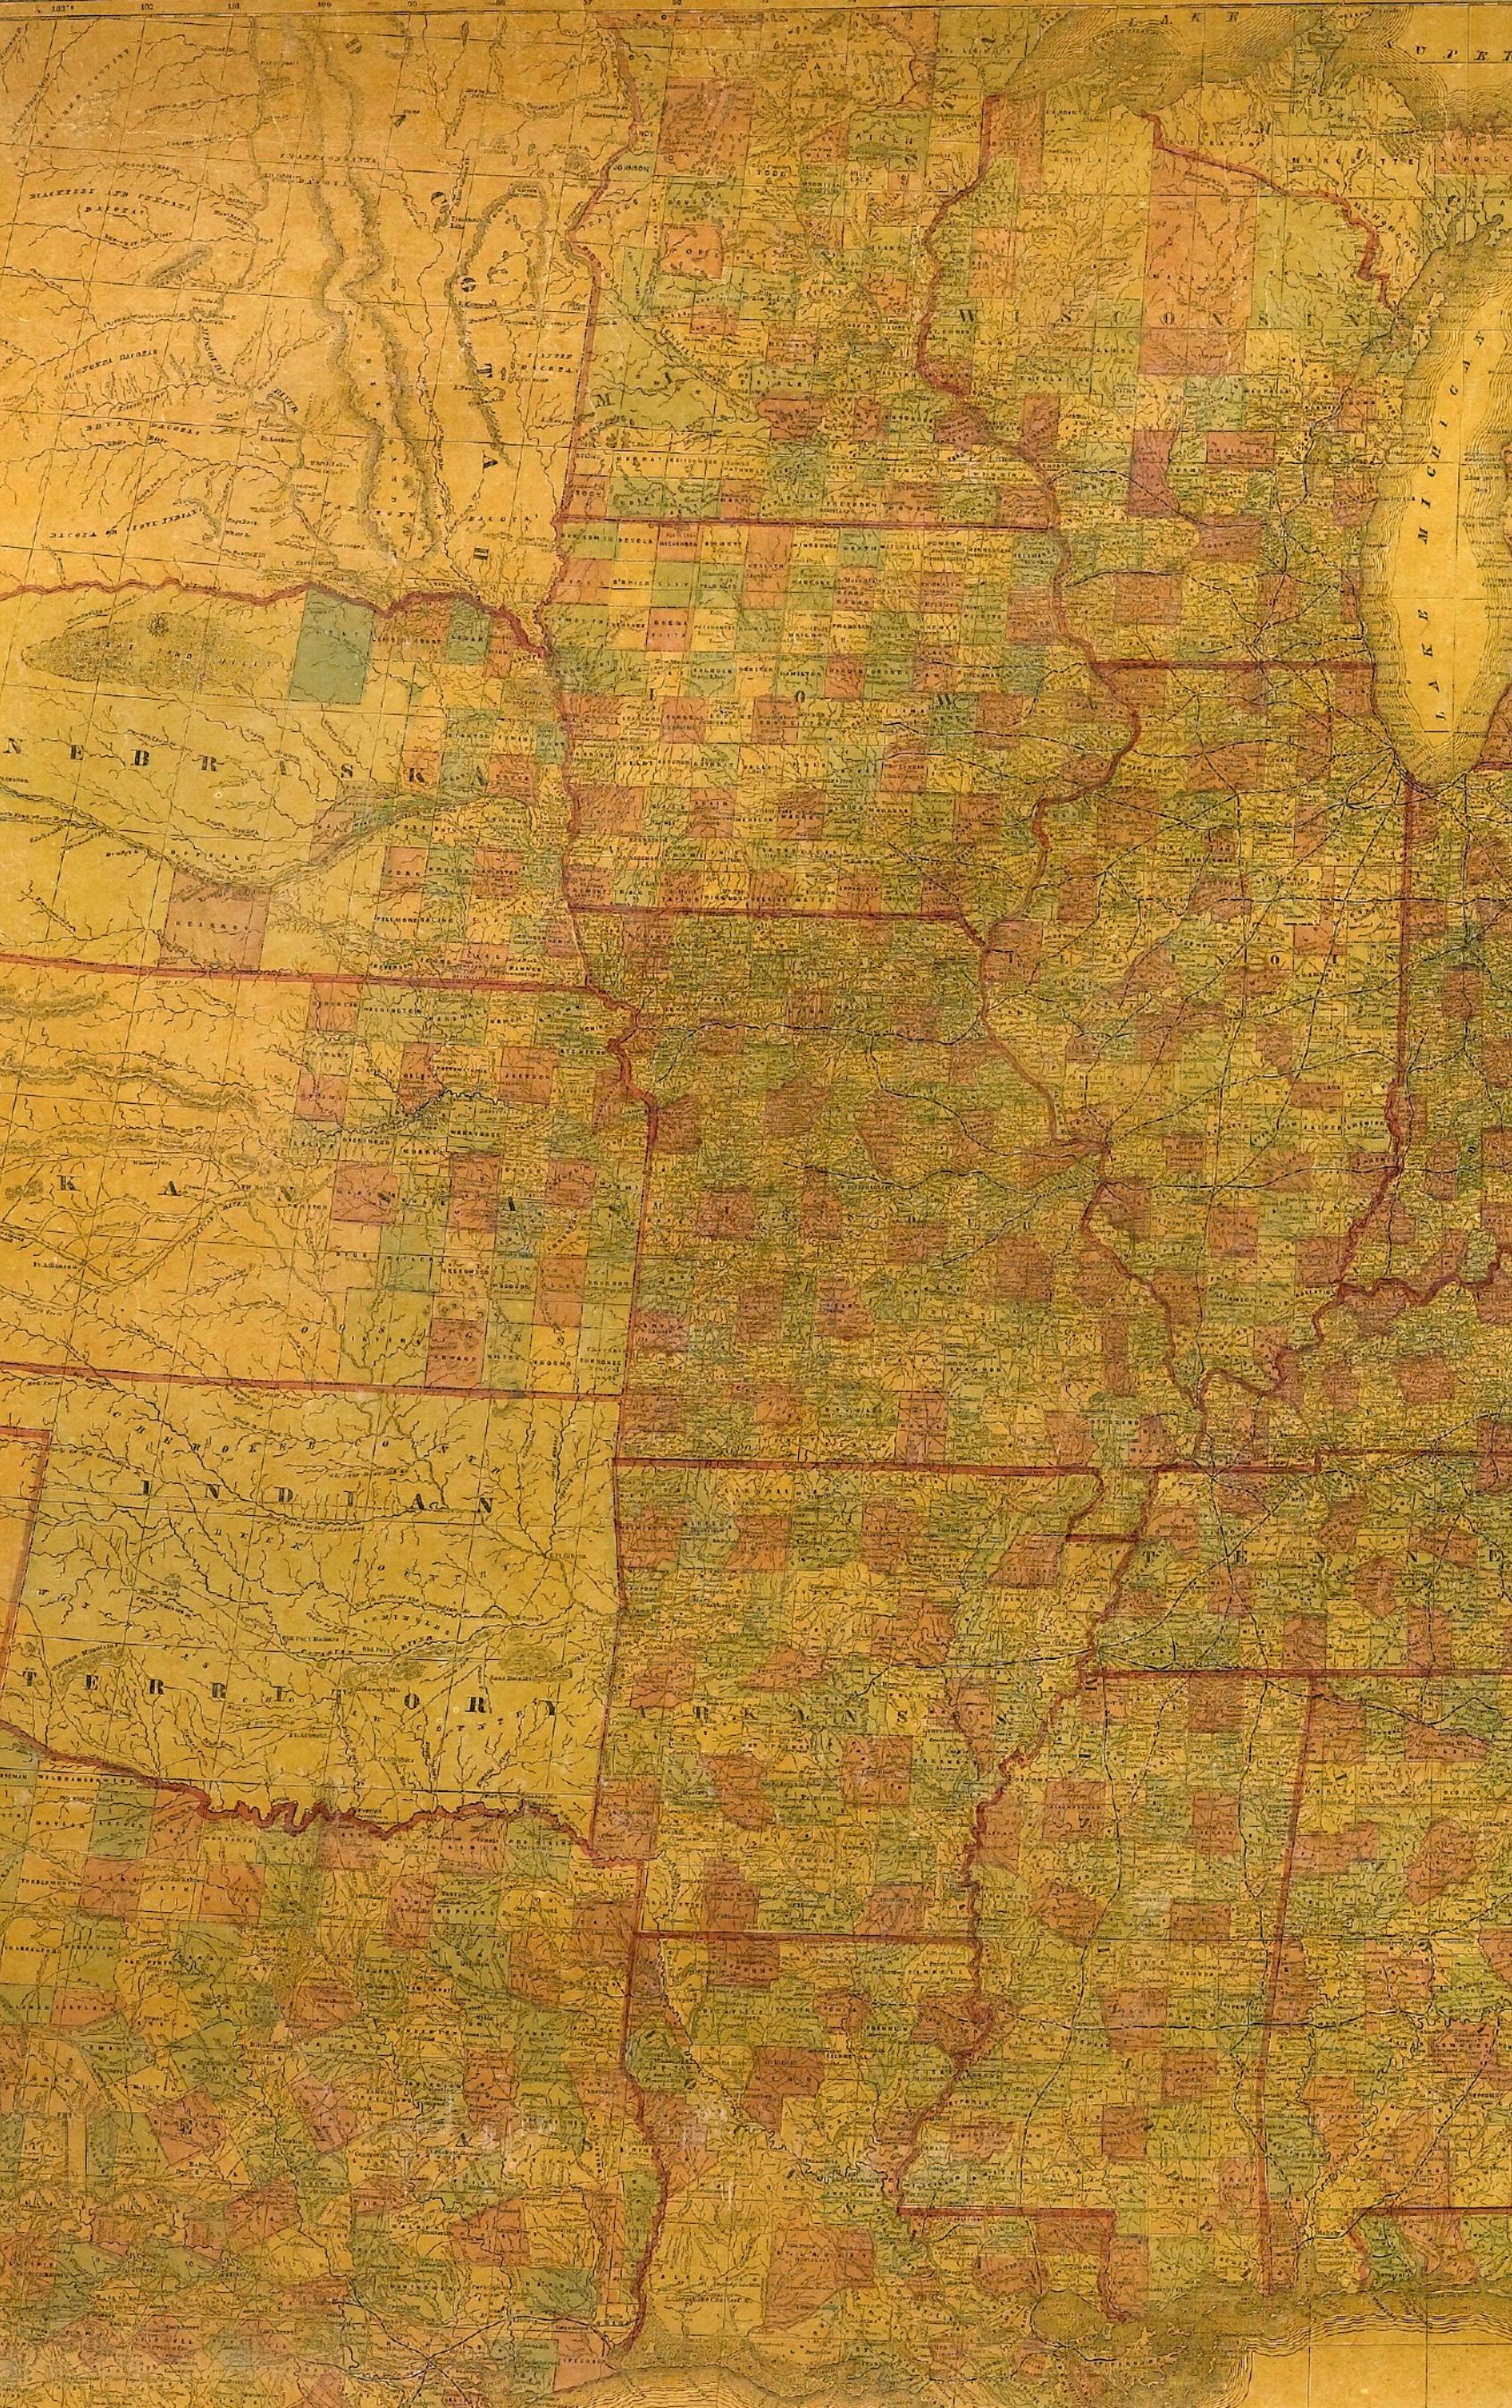 us map in 1863